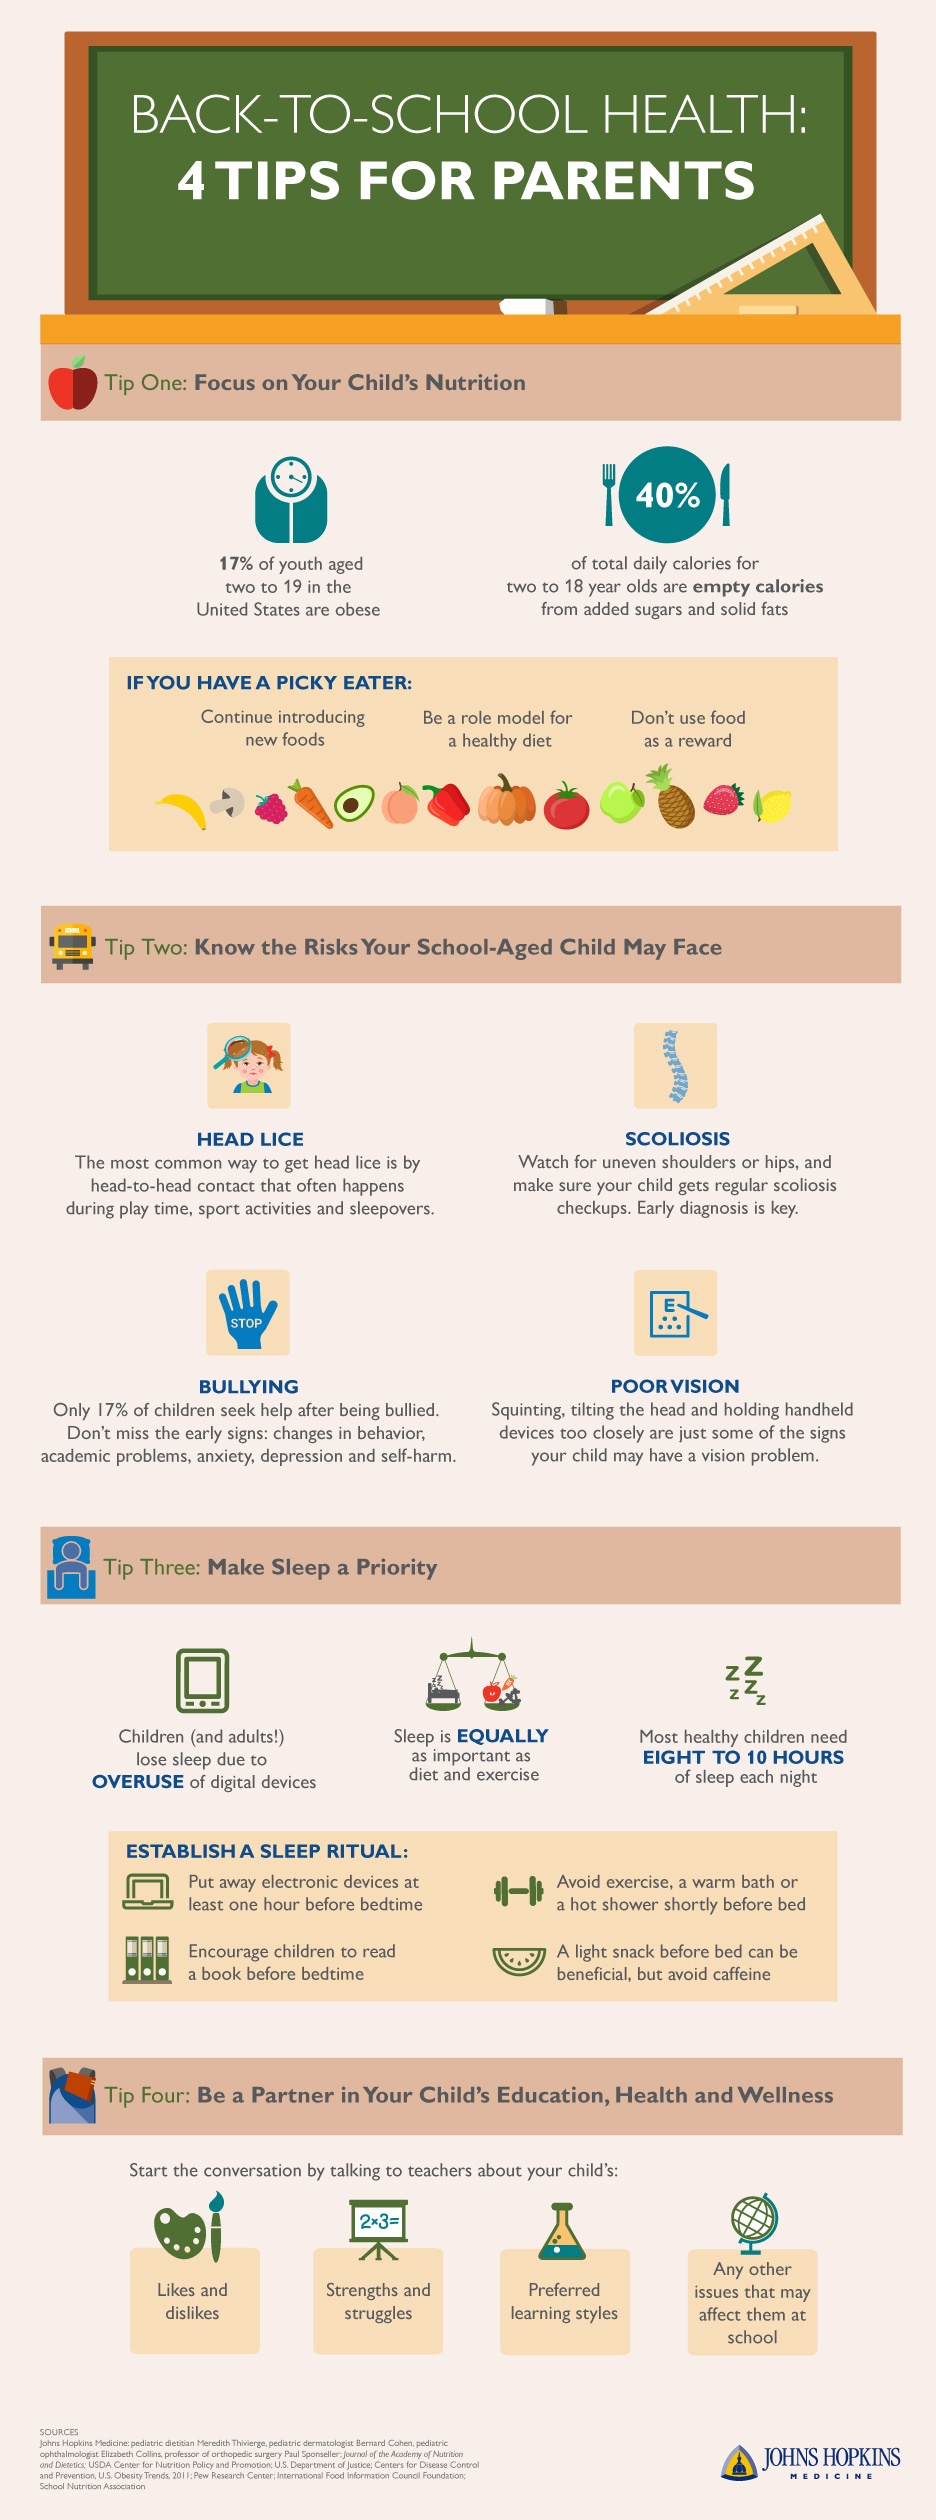 Back-to-School-Health-Tips-for-Parents-Infographic